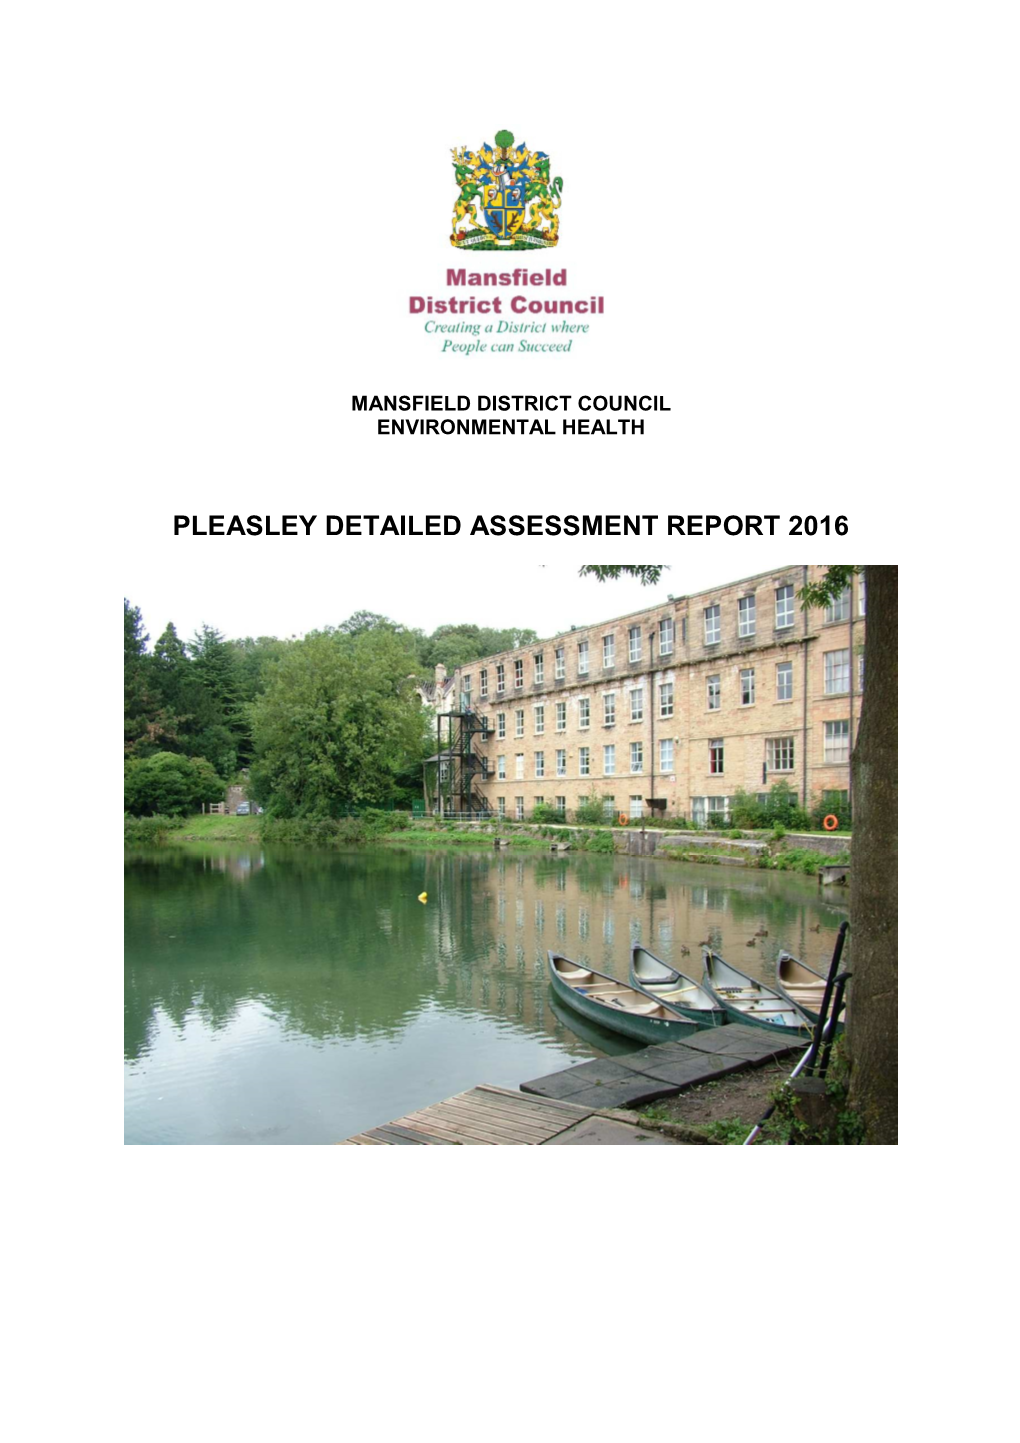 Pleasley Detailed Assessment Report 2016